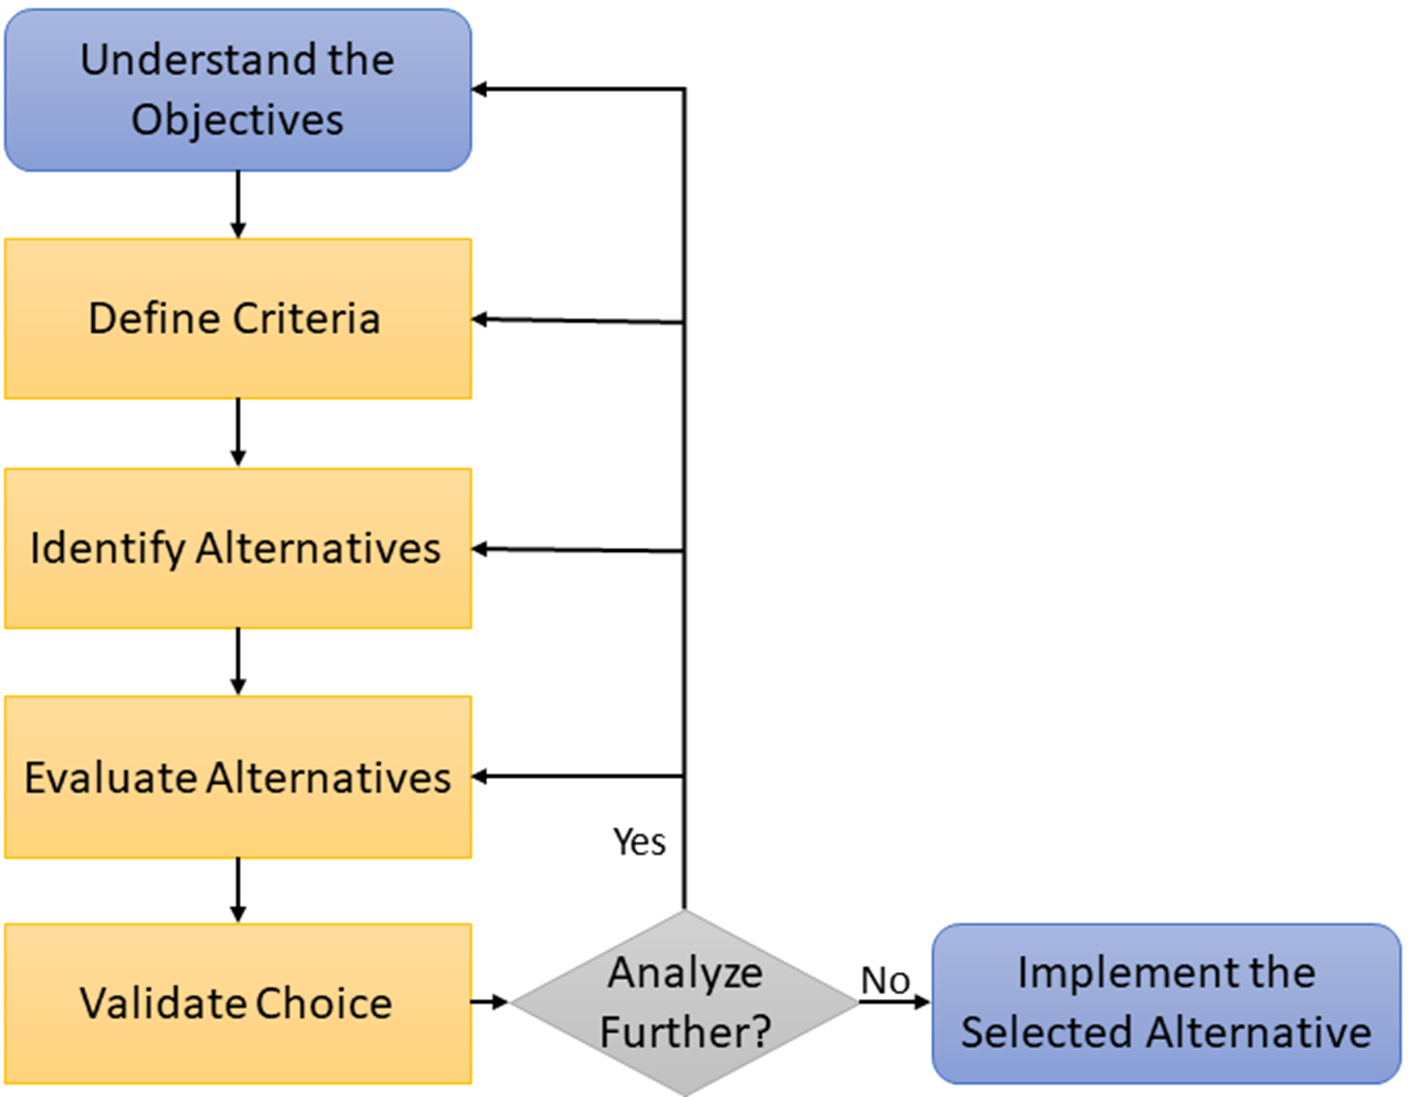 Figure shows the basic steps of a tradeoff study.  Start by Understanding the Objectives and the steps are Define Criteria, Identify Alternatives, Evaluate Alternatives and then Validate Choice as described in the following paragraphs.